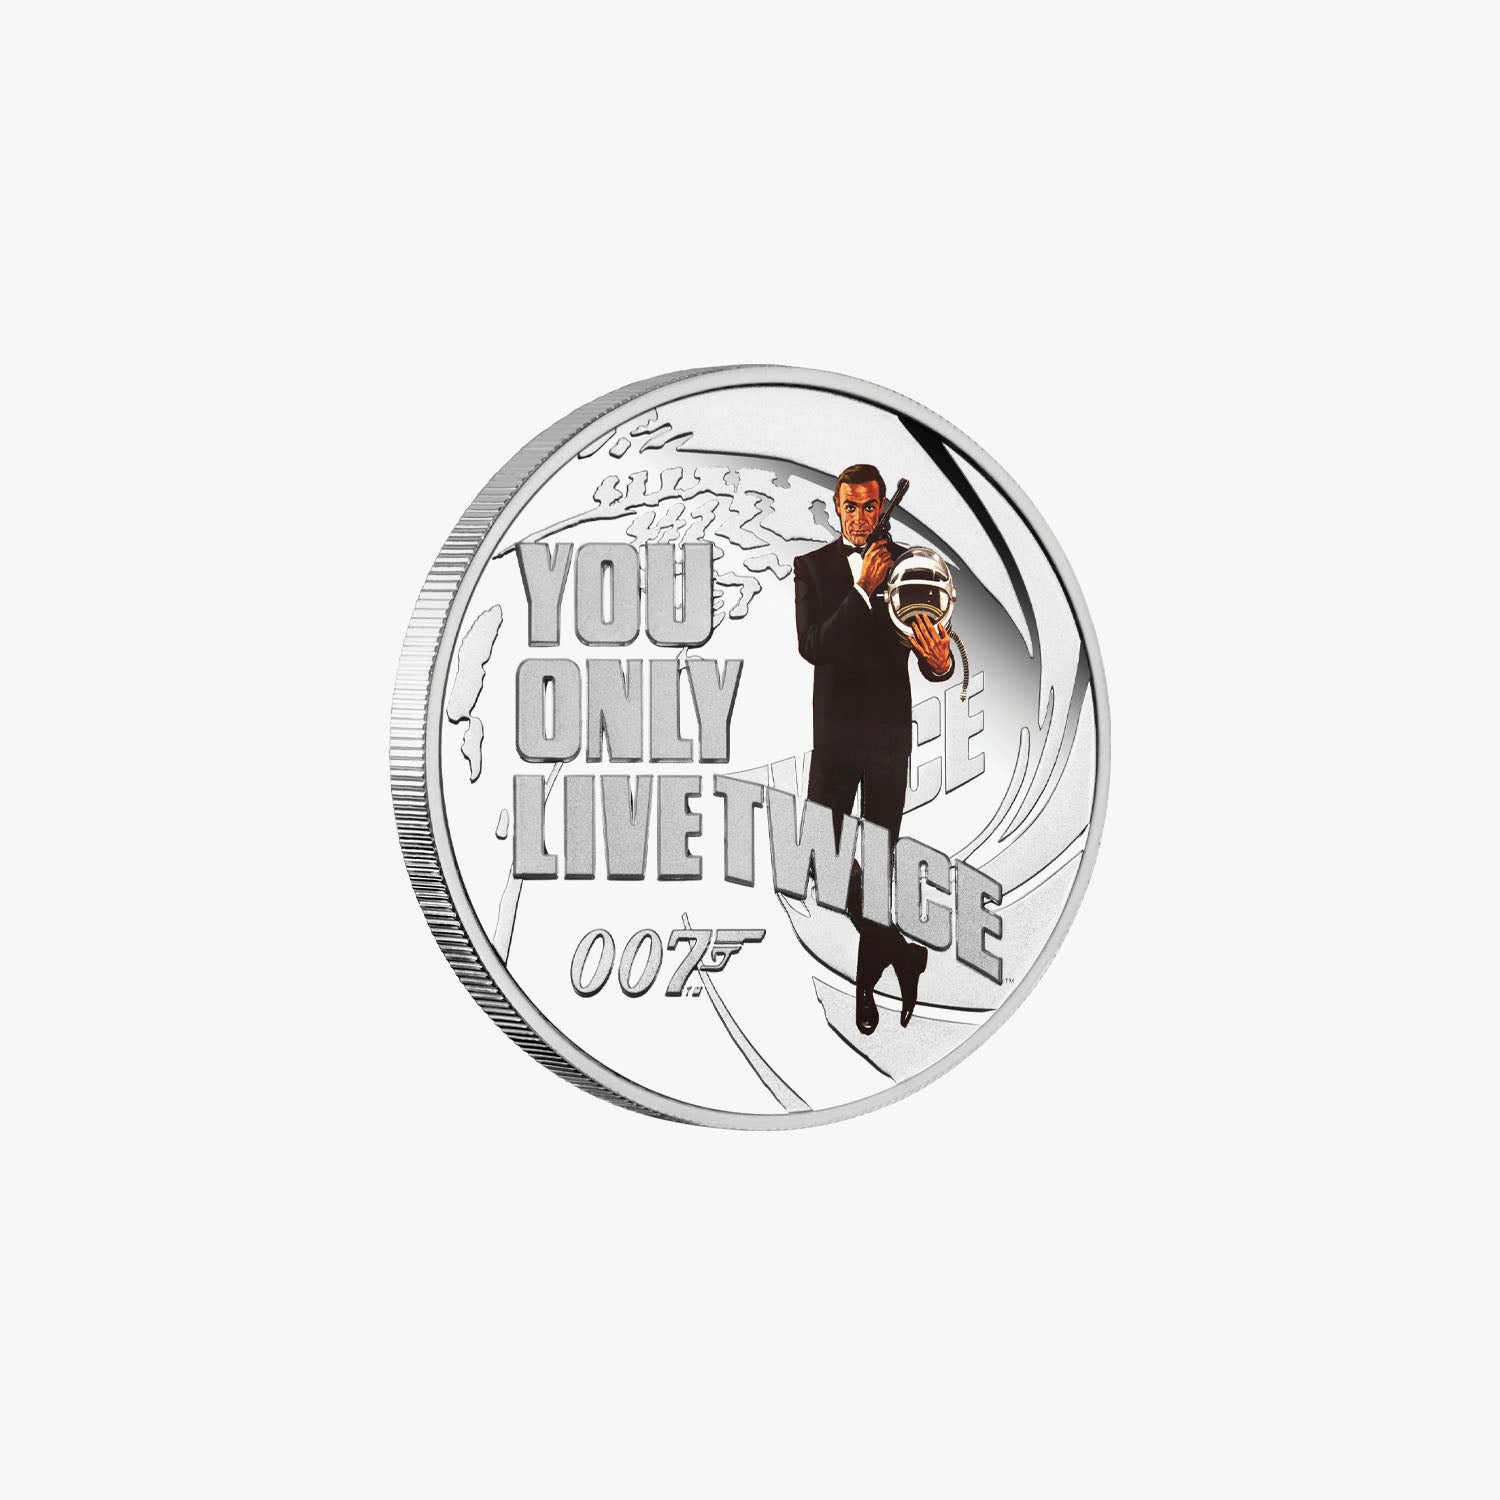 James Bond - You Only Live Twice Solid Silver Movie Coin